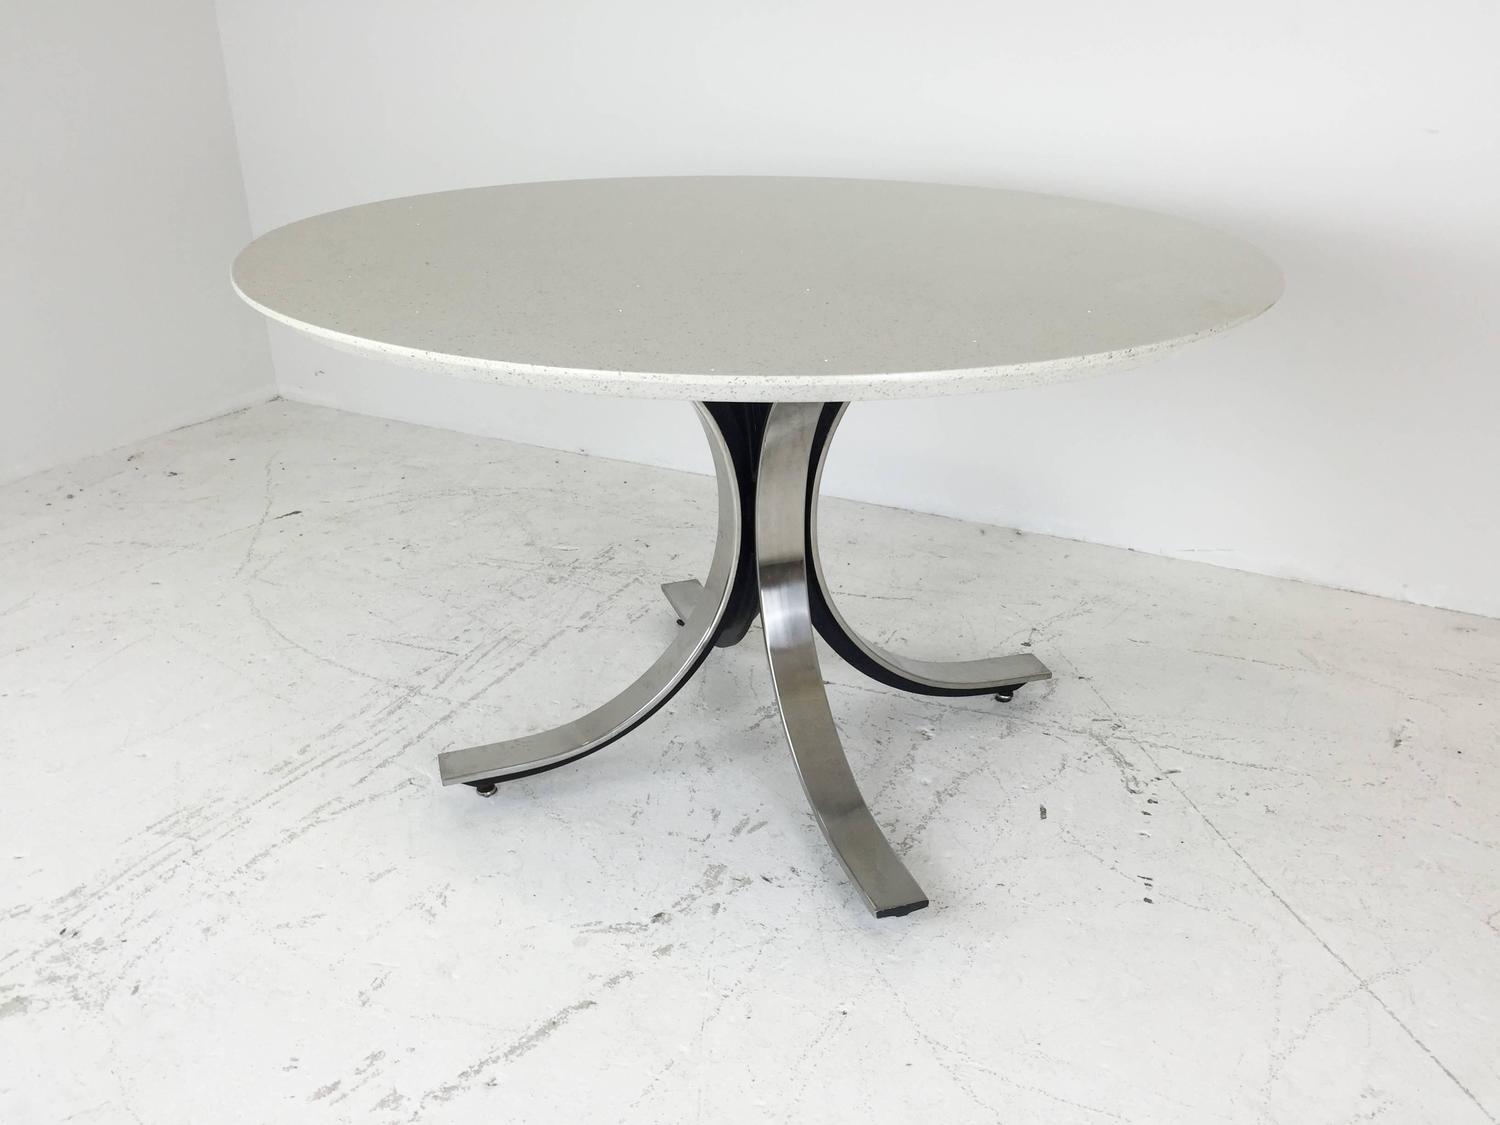 Four-Legged Chrome Base Round Dining Table with White Quartz Top by